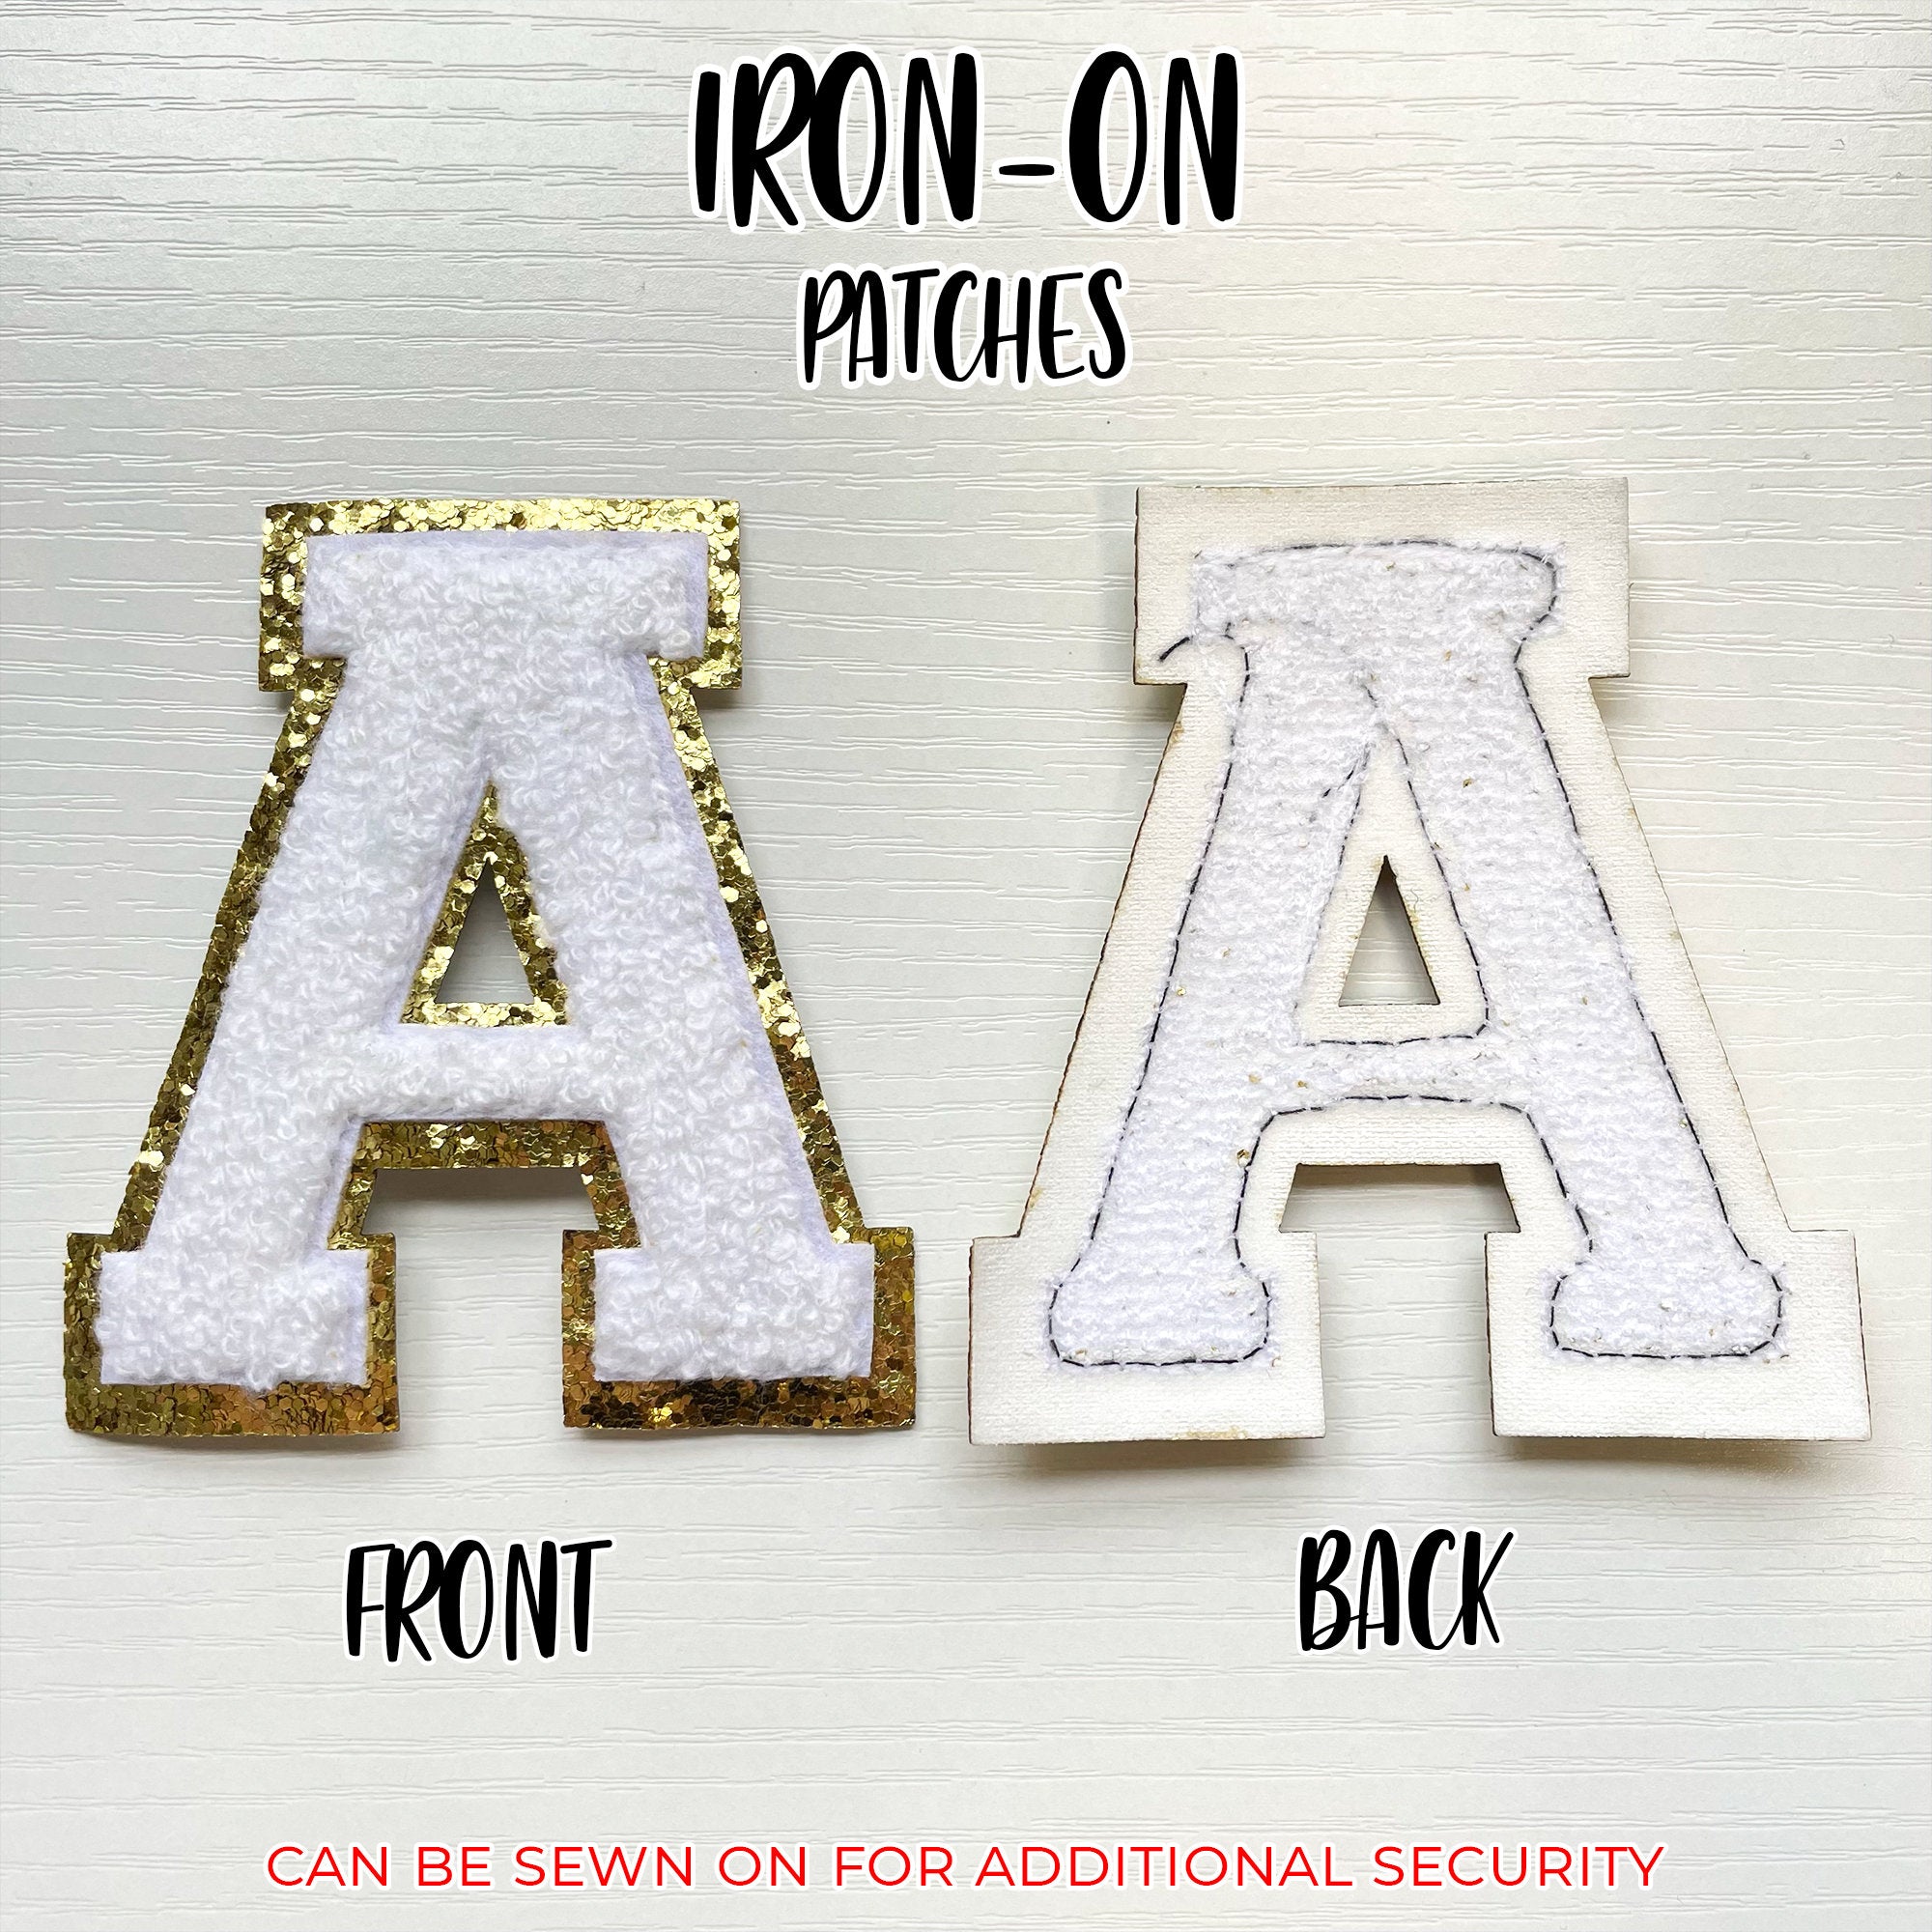 Big & Little Iron-On Varsity Greek Letter Patch Set, Chenille Patches, Gold Glitter Trim, DIY Project